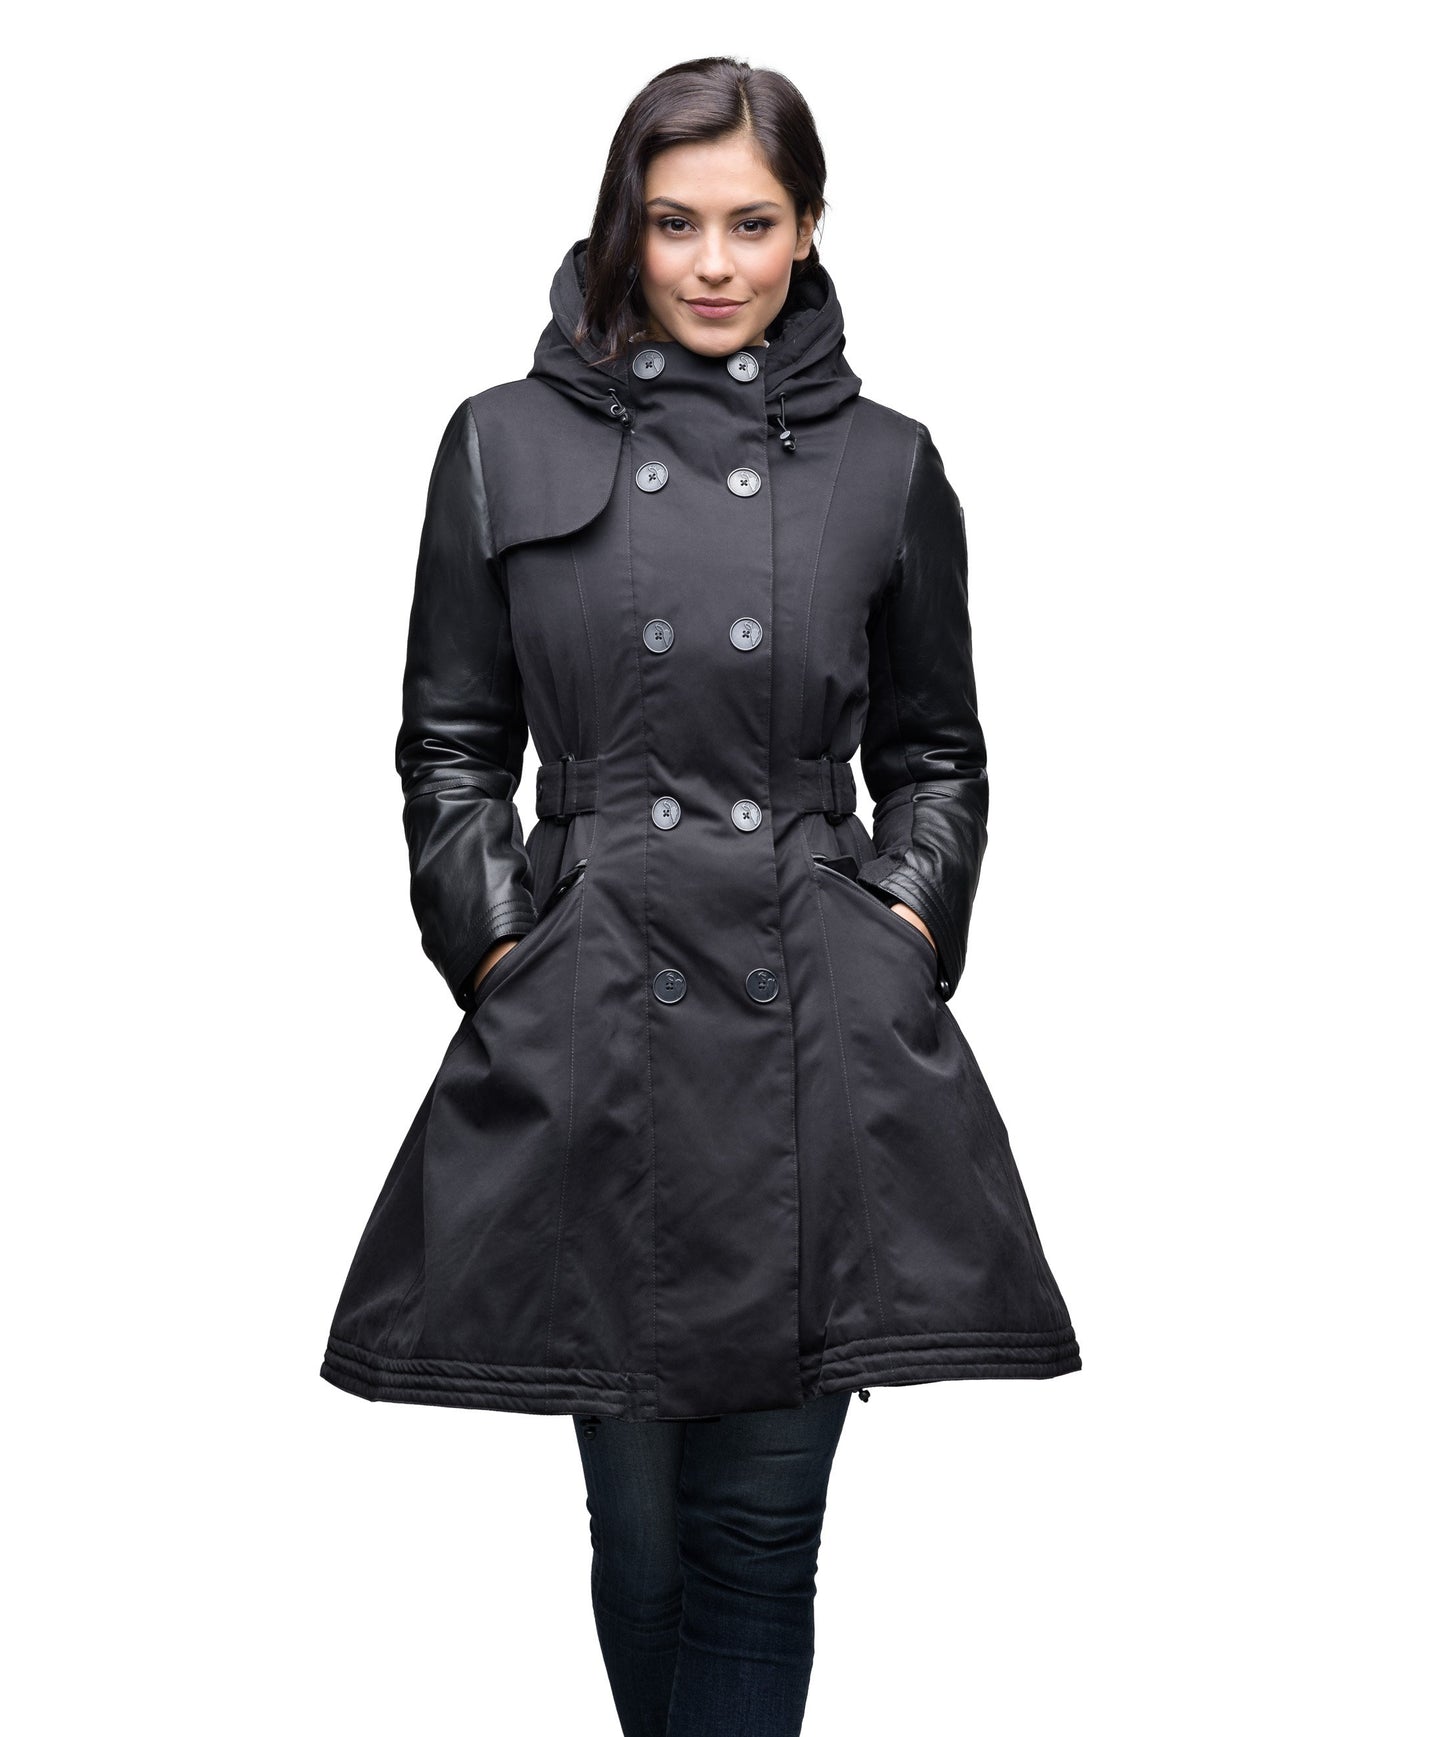 Women's down filled overcoat with double breasted closure and removable down filled lined in Black